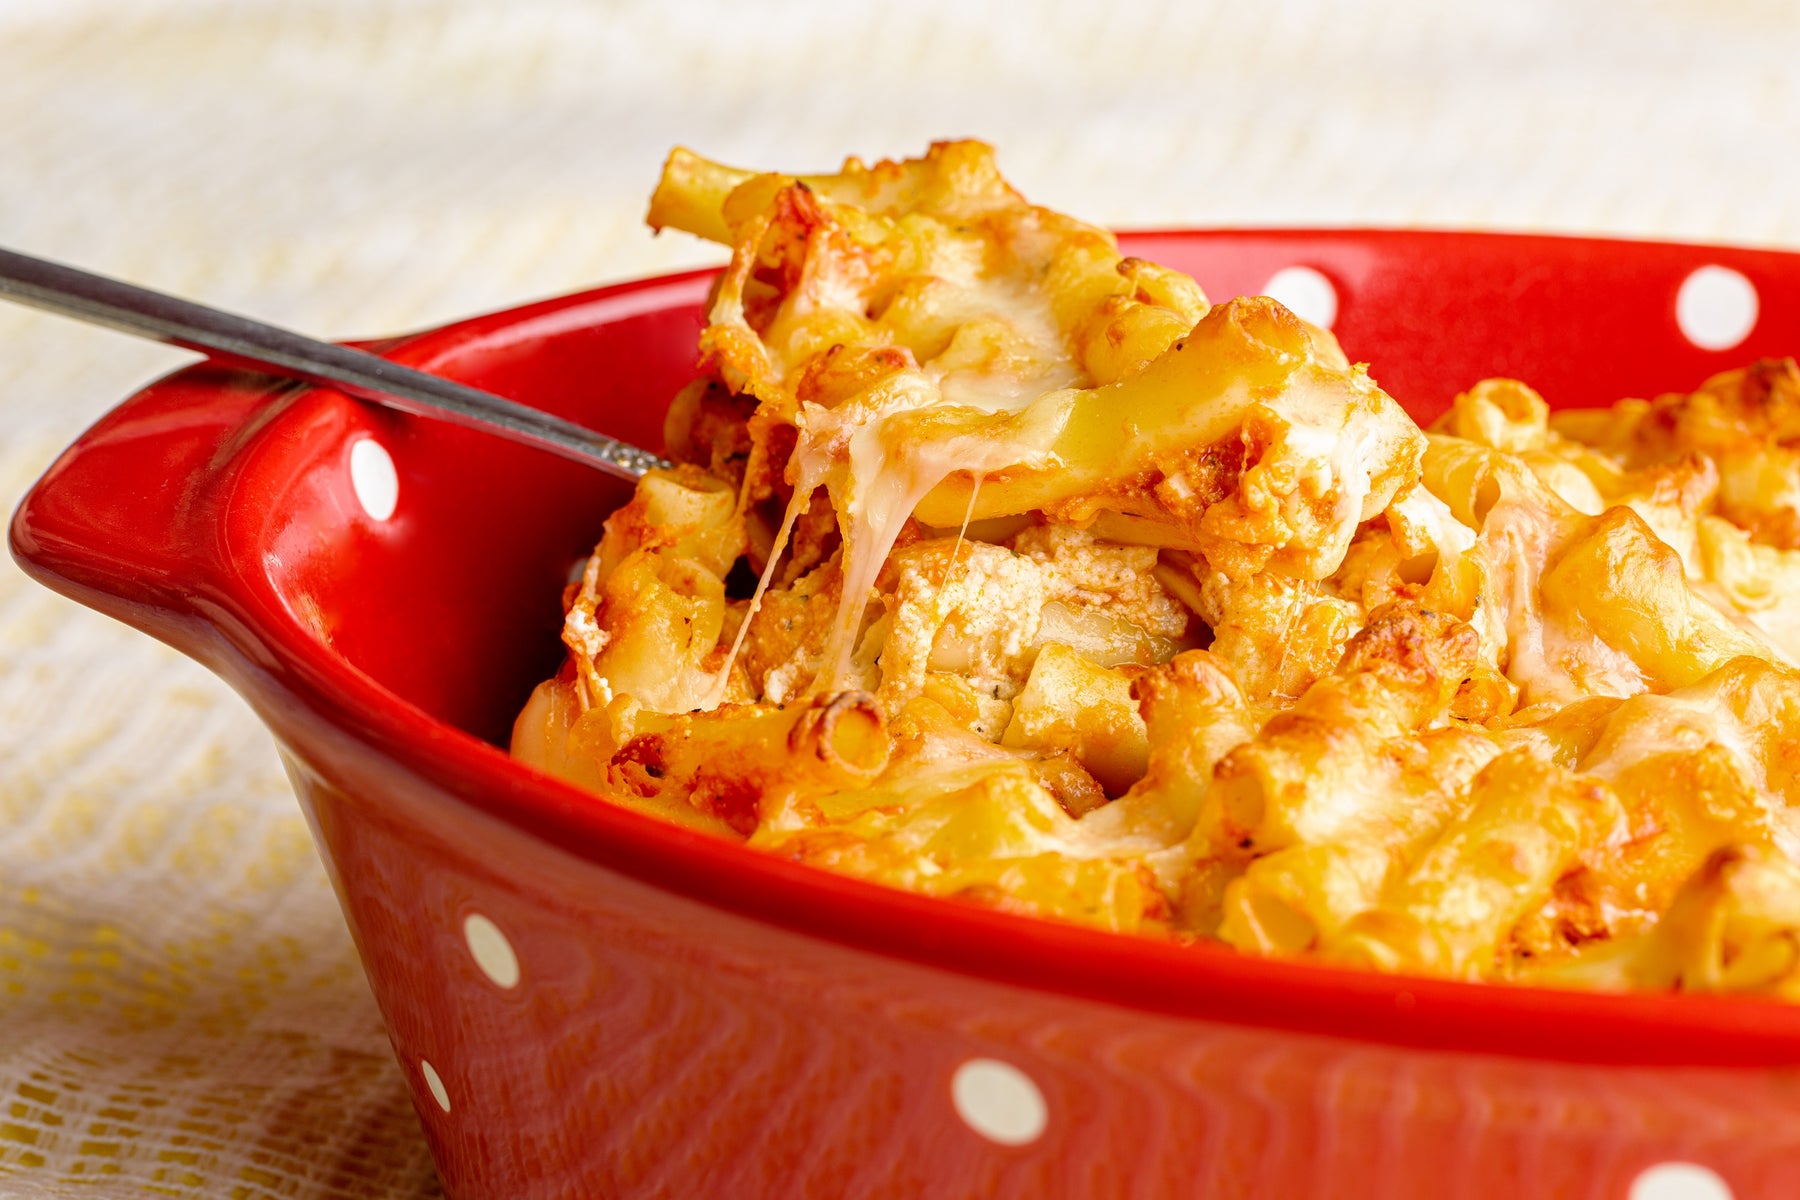 How to Make Baked Ziti with Three Cheeses